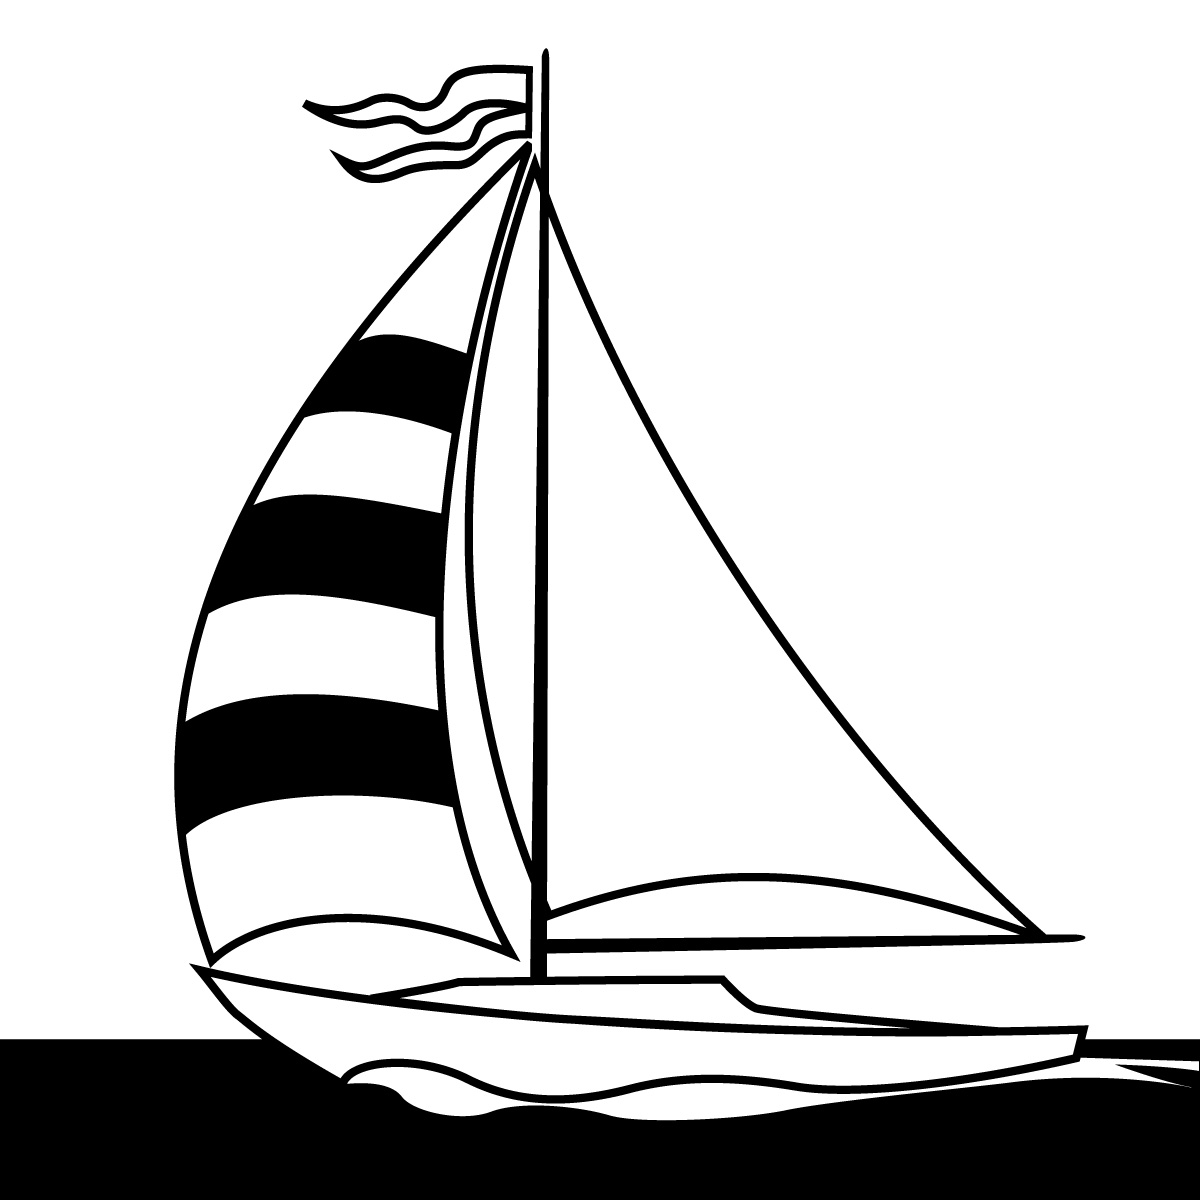 Simple Sailboat Drawing - ClipArt Best